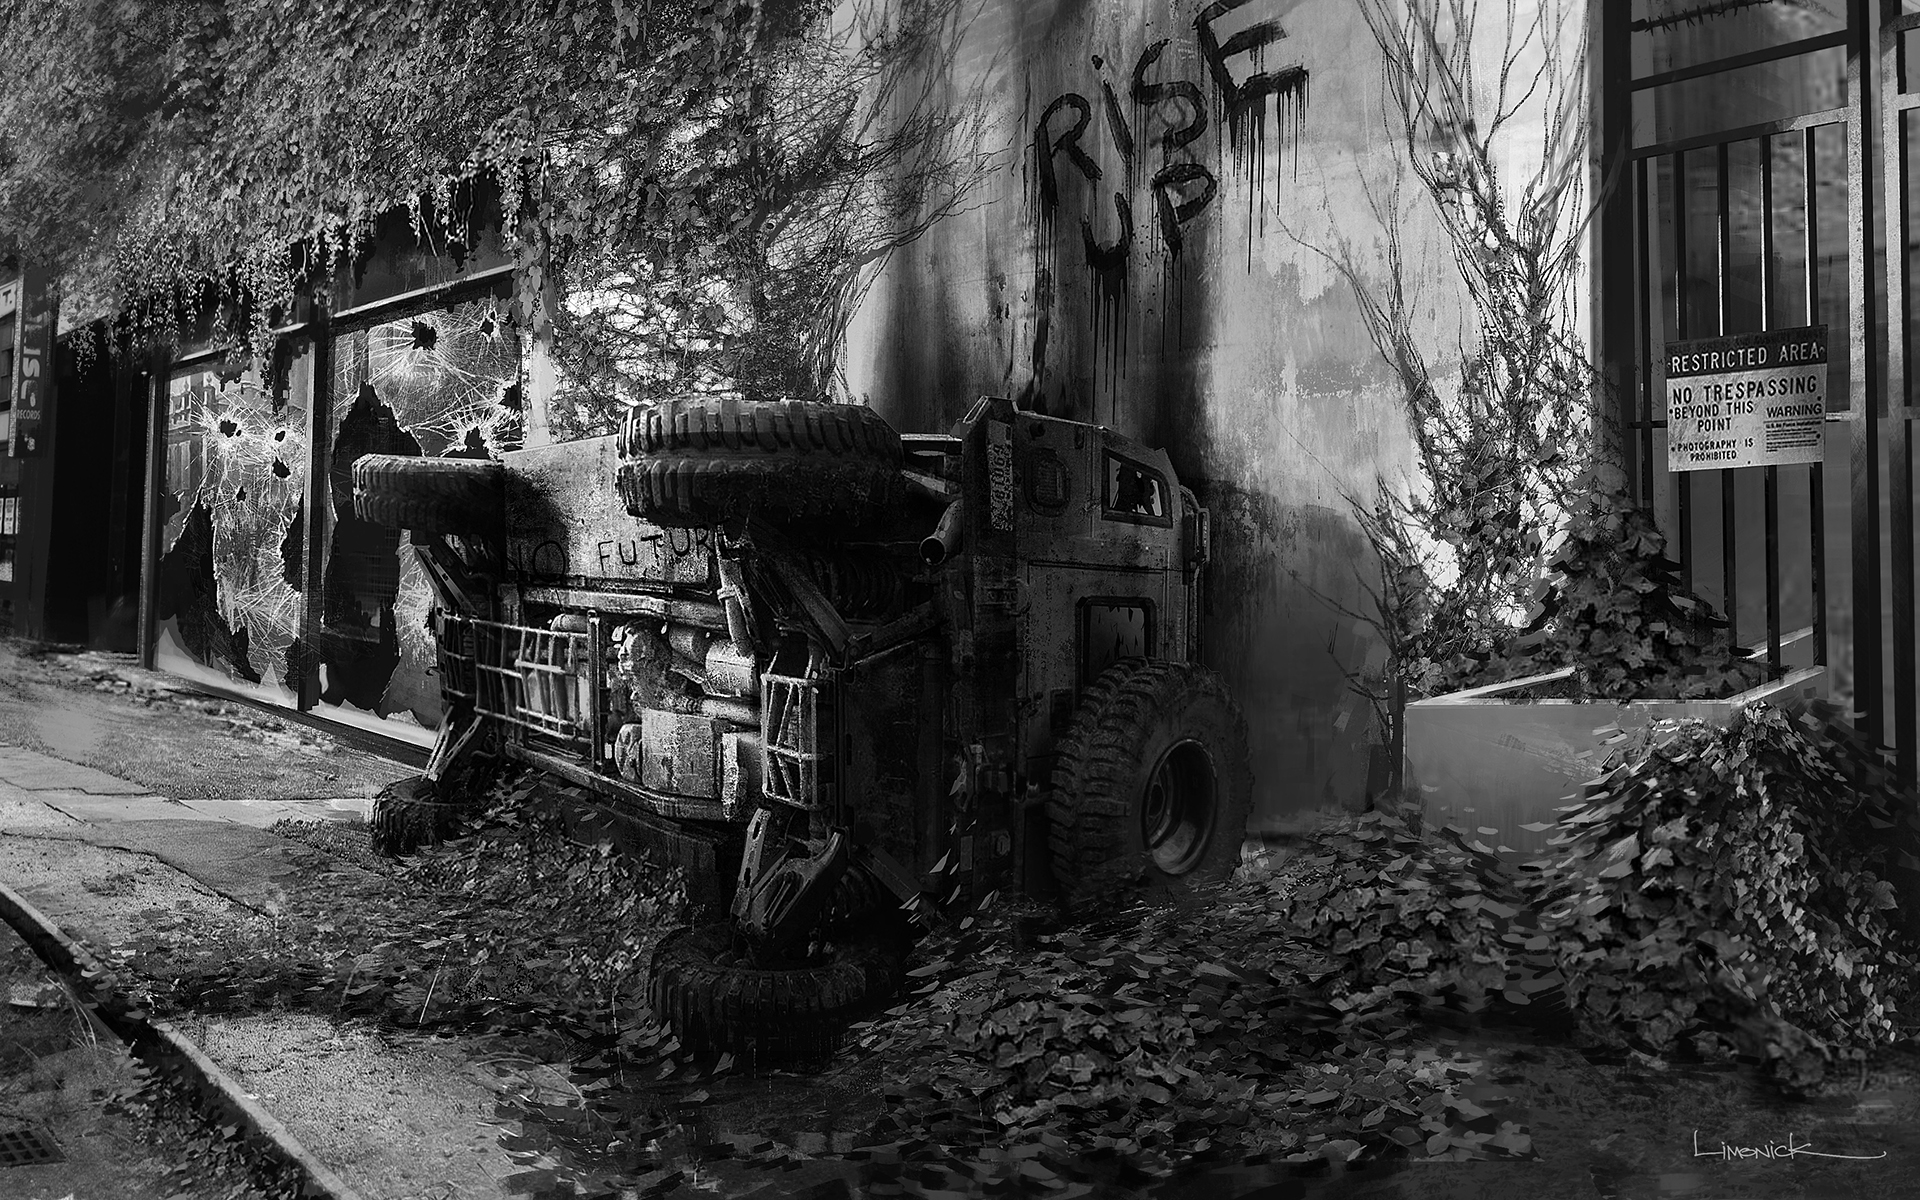 truck, Overturned, B w, Abandon, Deserted, Riot, Apocalyptic, Anarchy Wallpaper